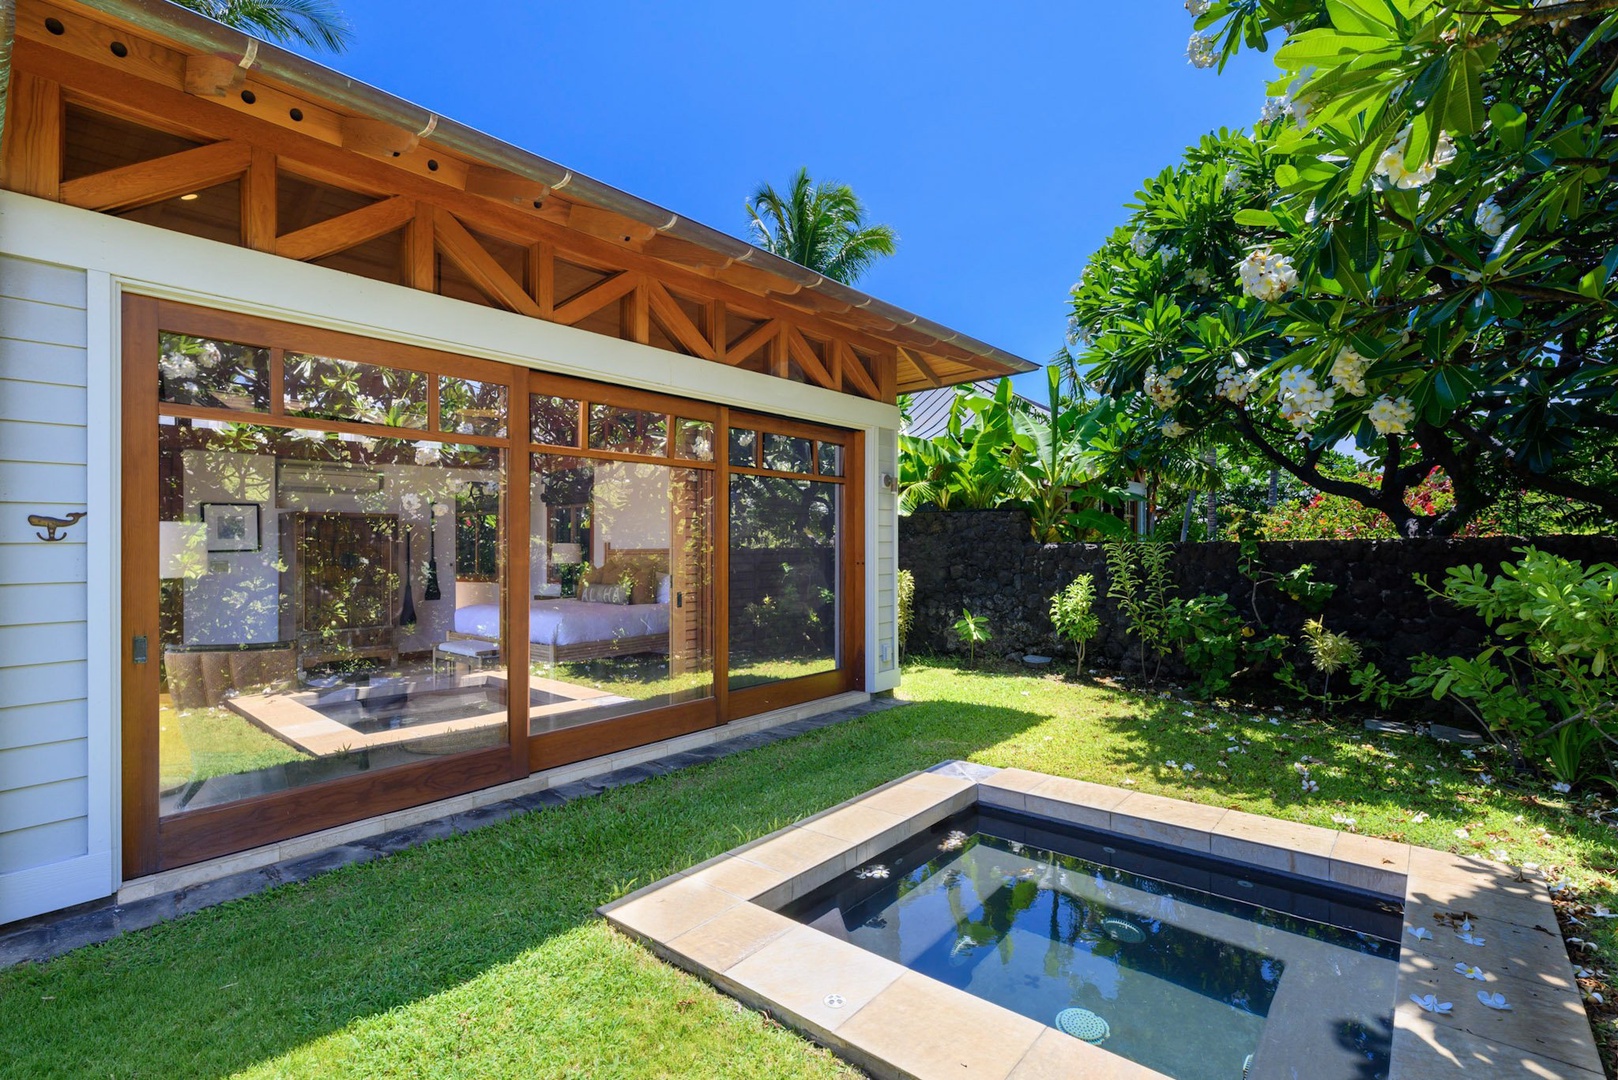 Kamuela Vacation Rentals, 3BD Na Hale 3 at Pauoa Beach Club at Mauna Lani Resort - Large glass sliders for a seamless indoor/outdoor living.